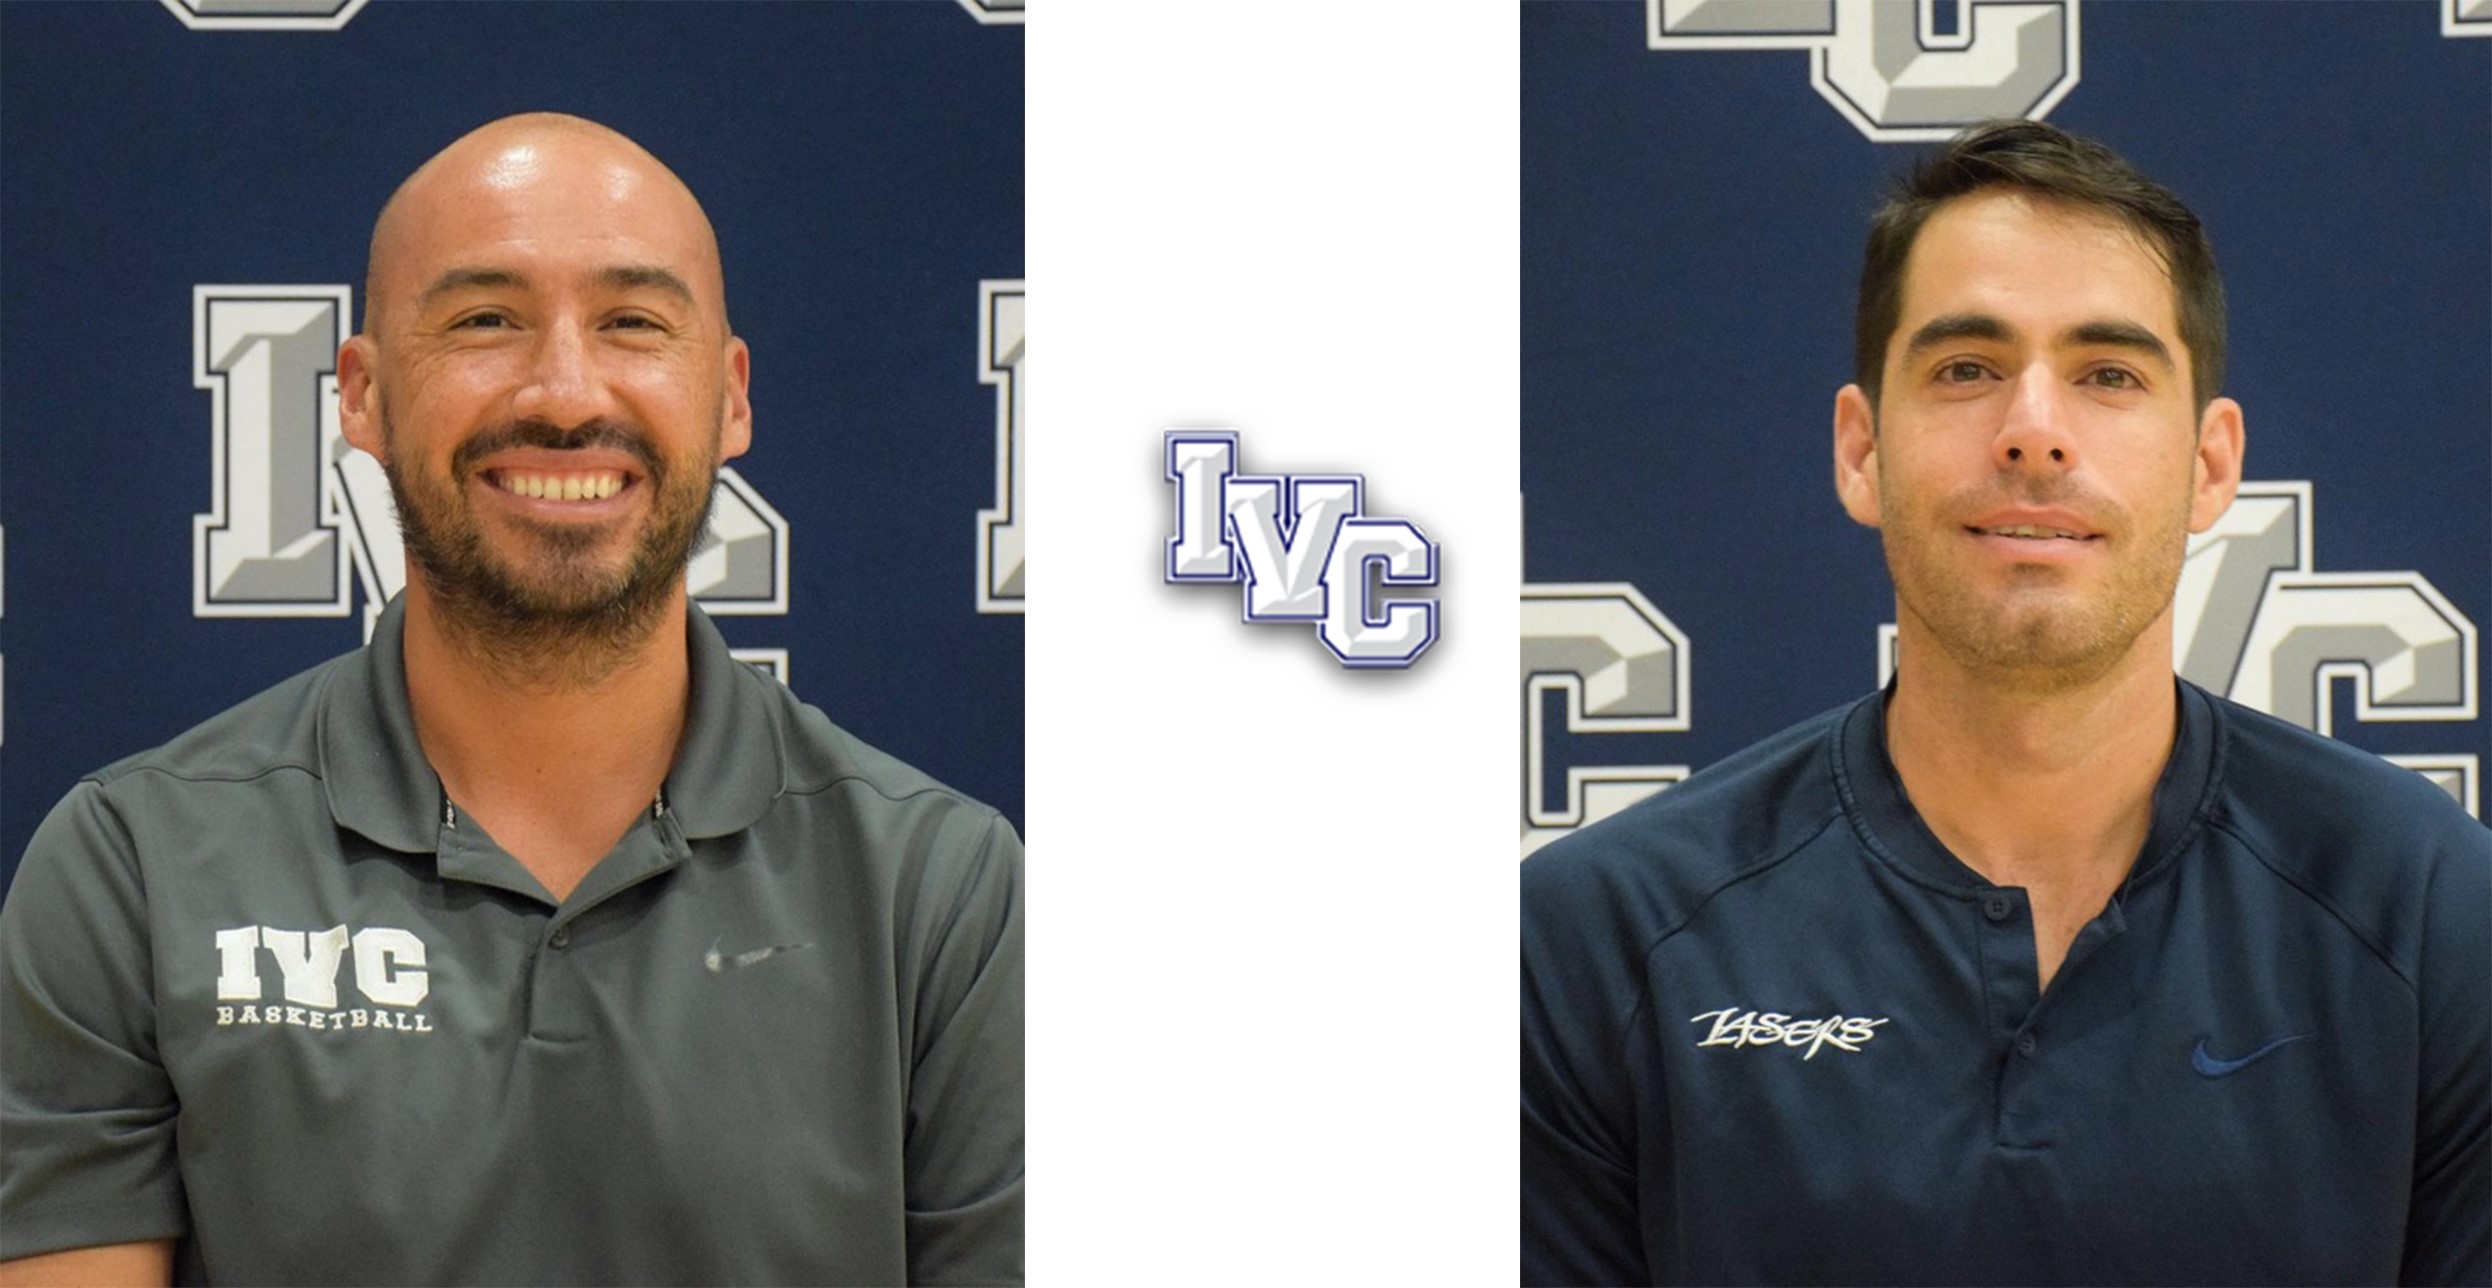 Garey and Jones are Irvine Valley's coaches of the year